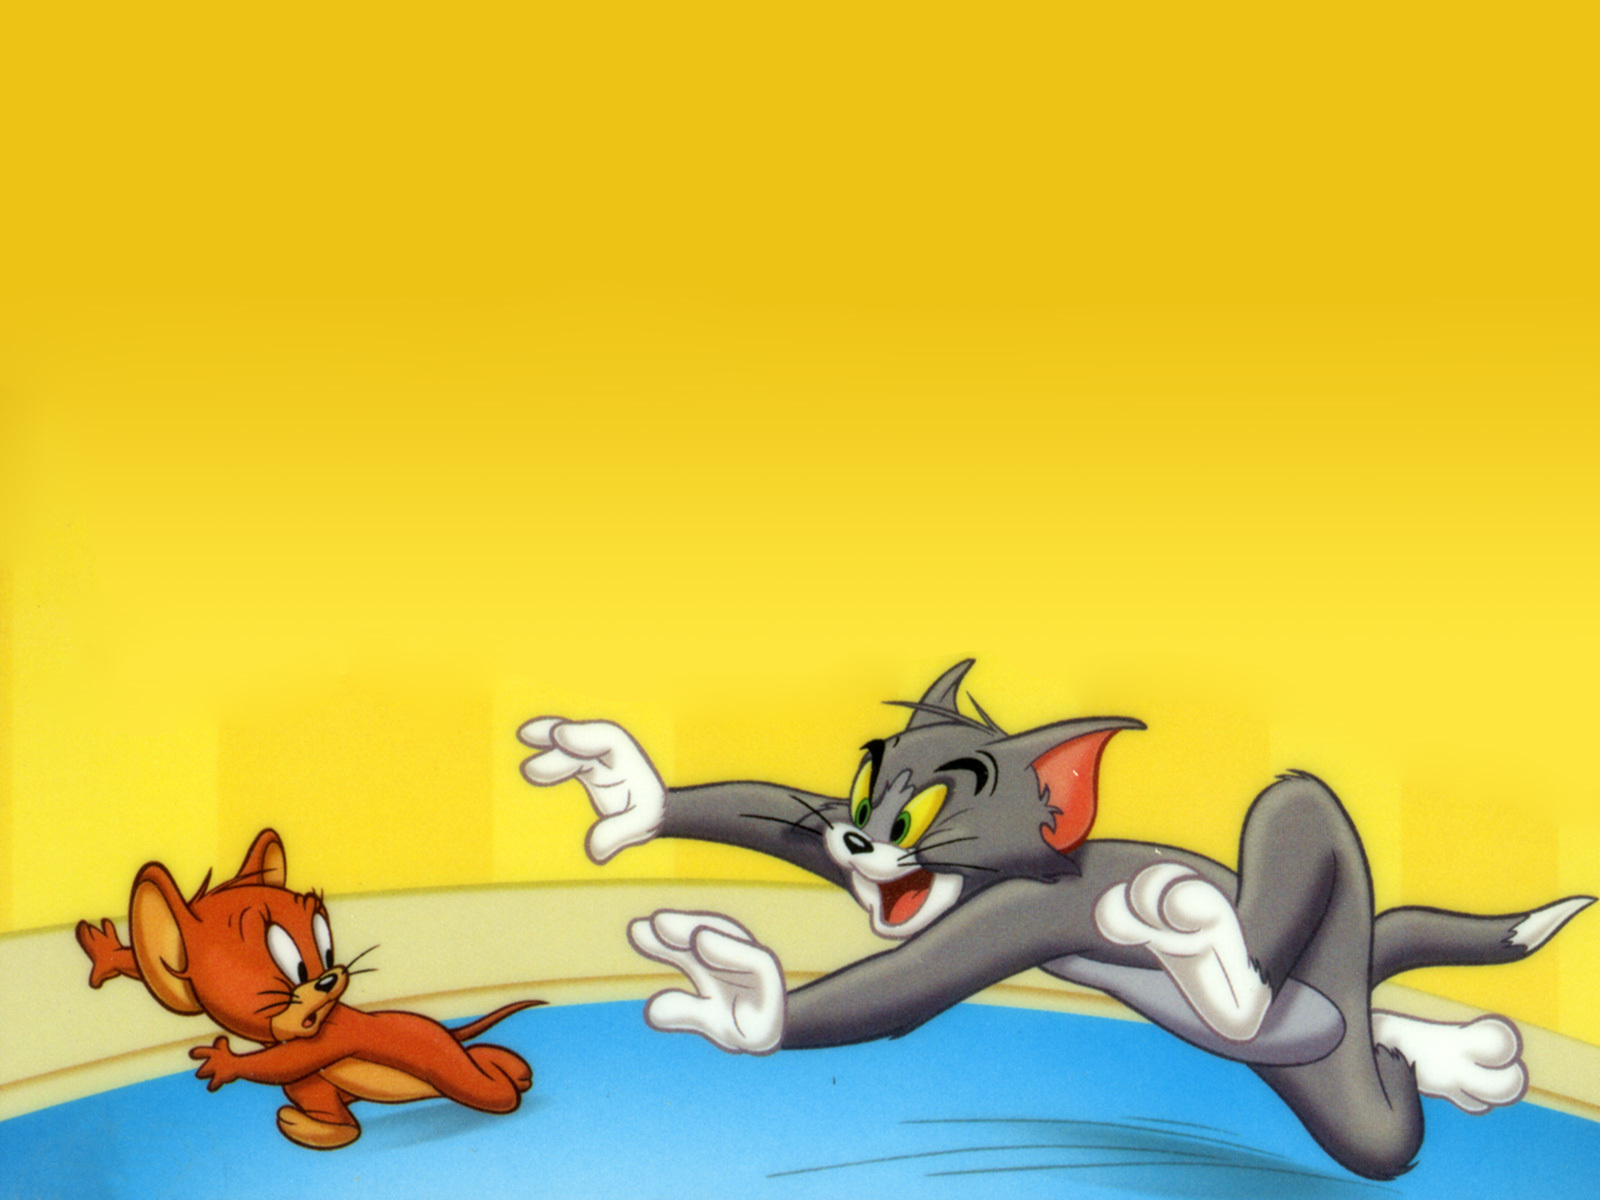 Lovely Wallpapers of Funny Characters Tom & JerryPhotography